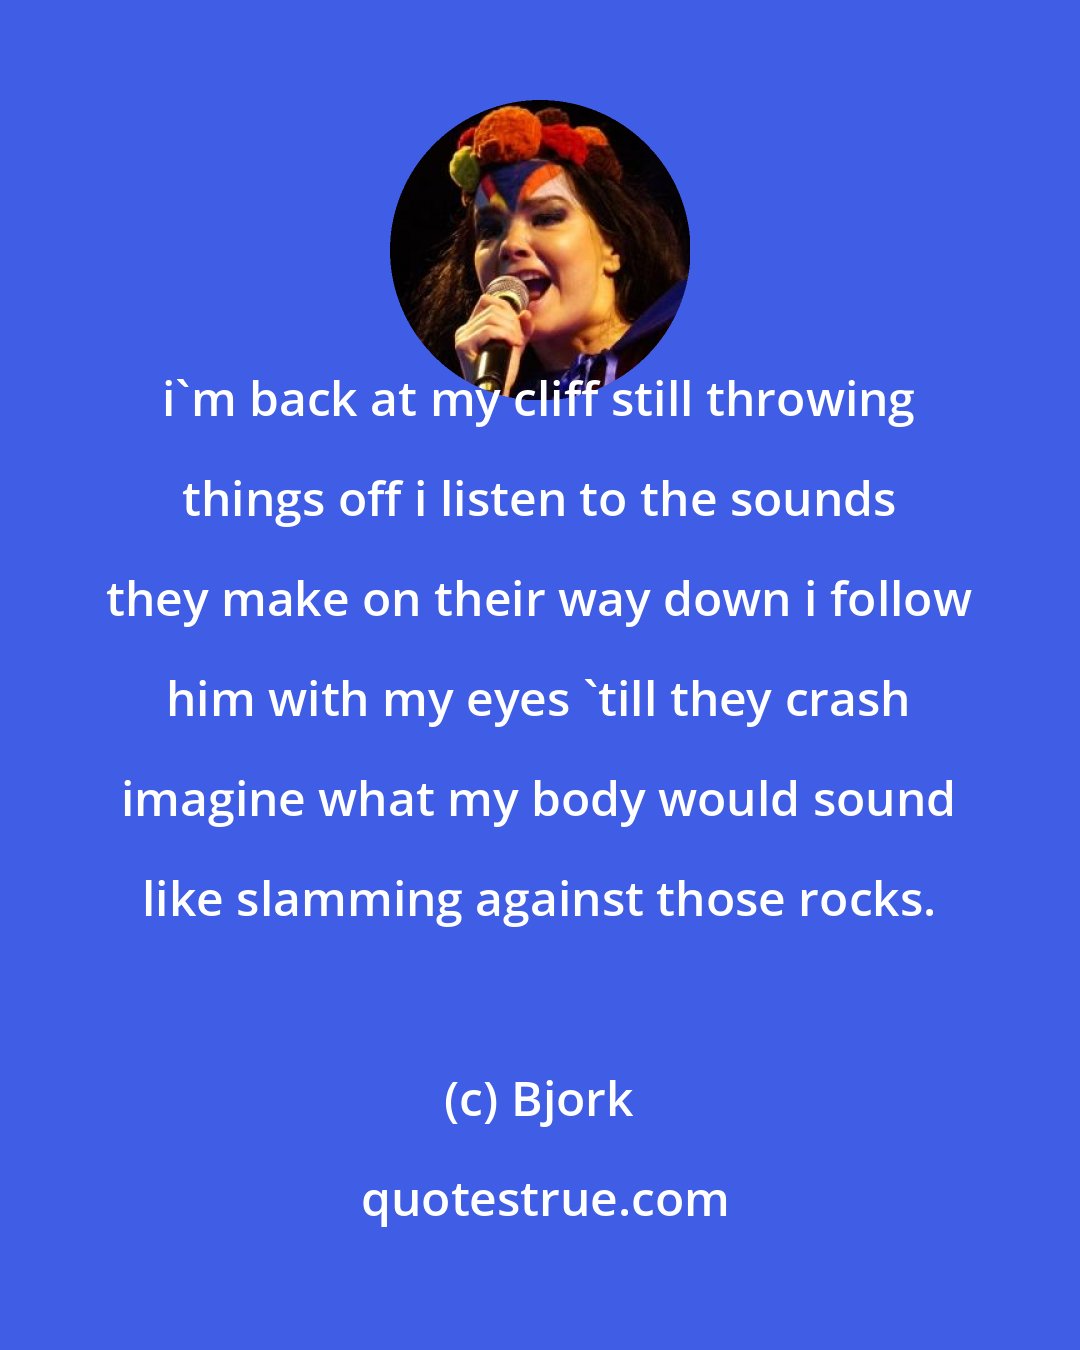 Bjork: i'm back at my cliff still throwing things off i listen to the sounds they make on their way down i follow him with my eyes 'till they crash imagine what my body would sound like slamming against those rocks.